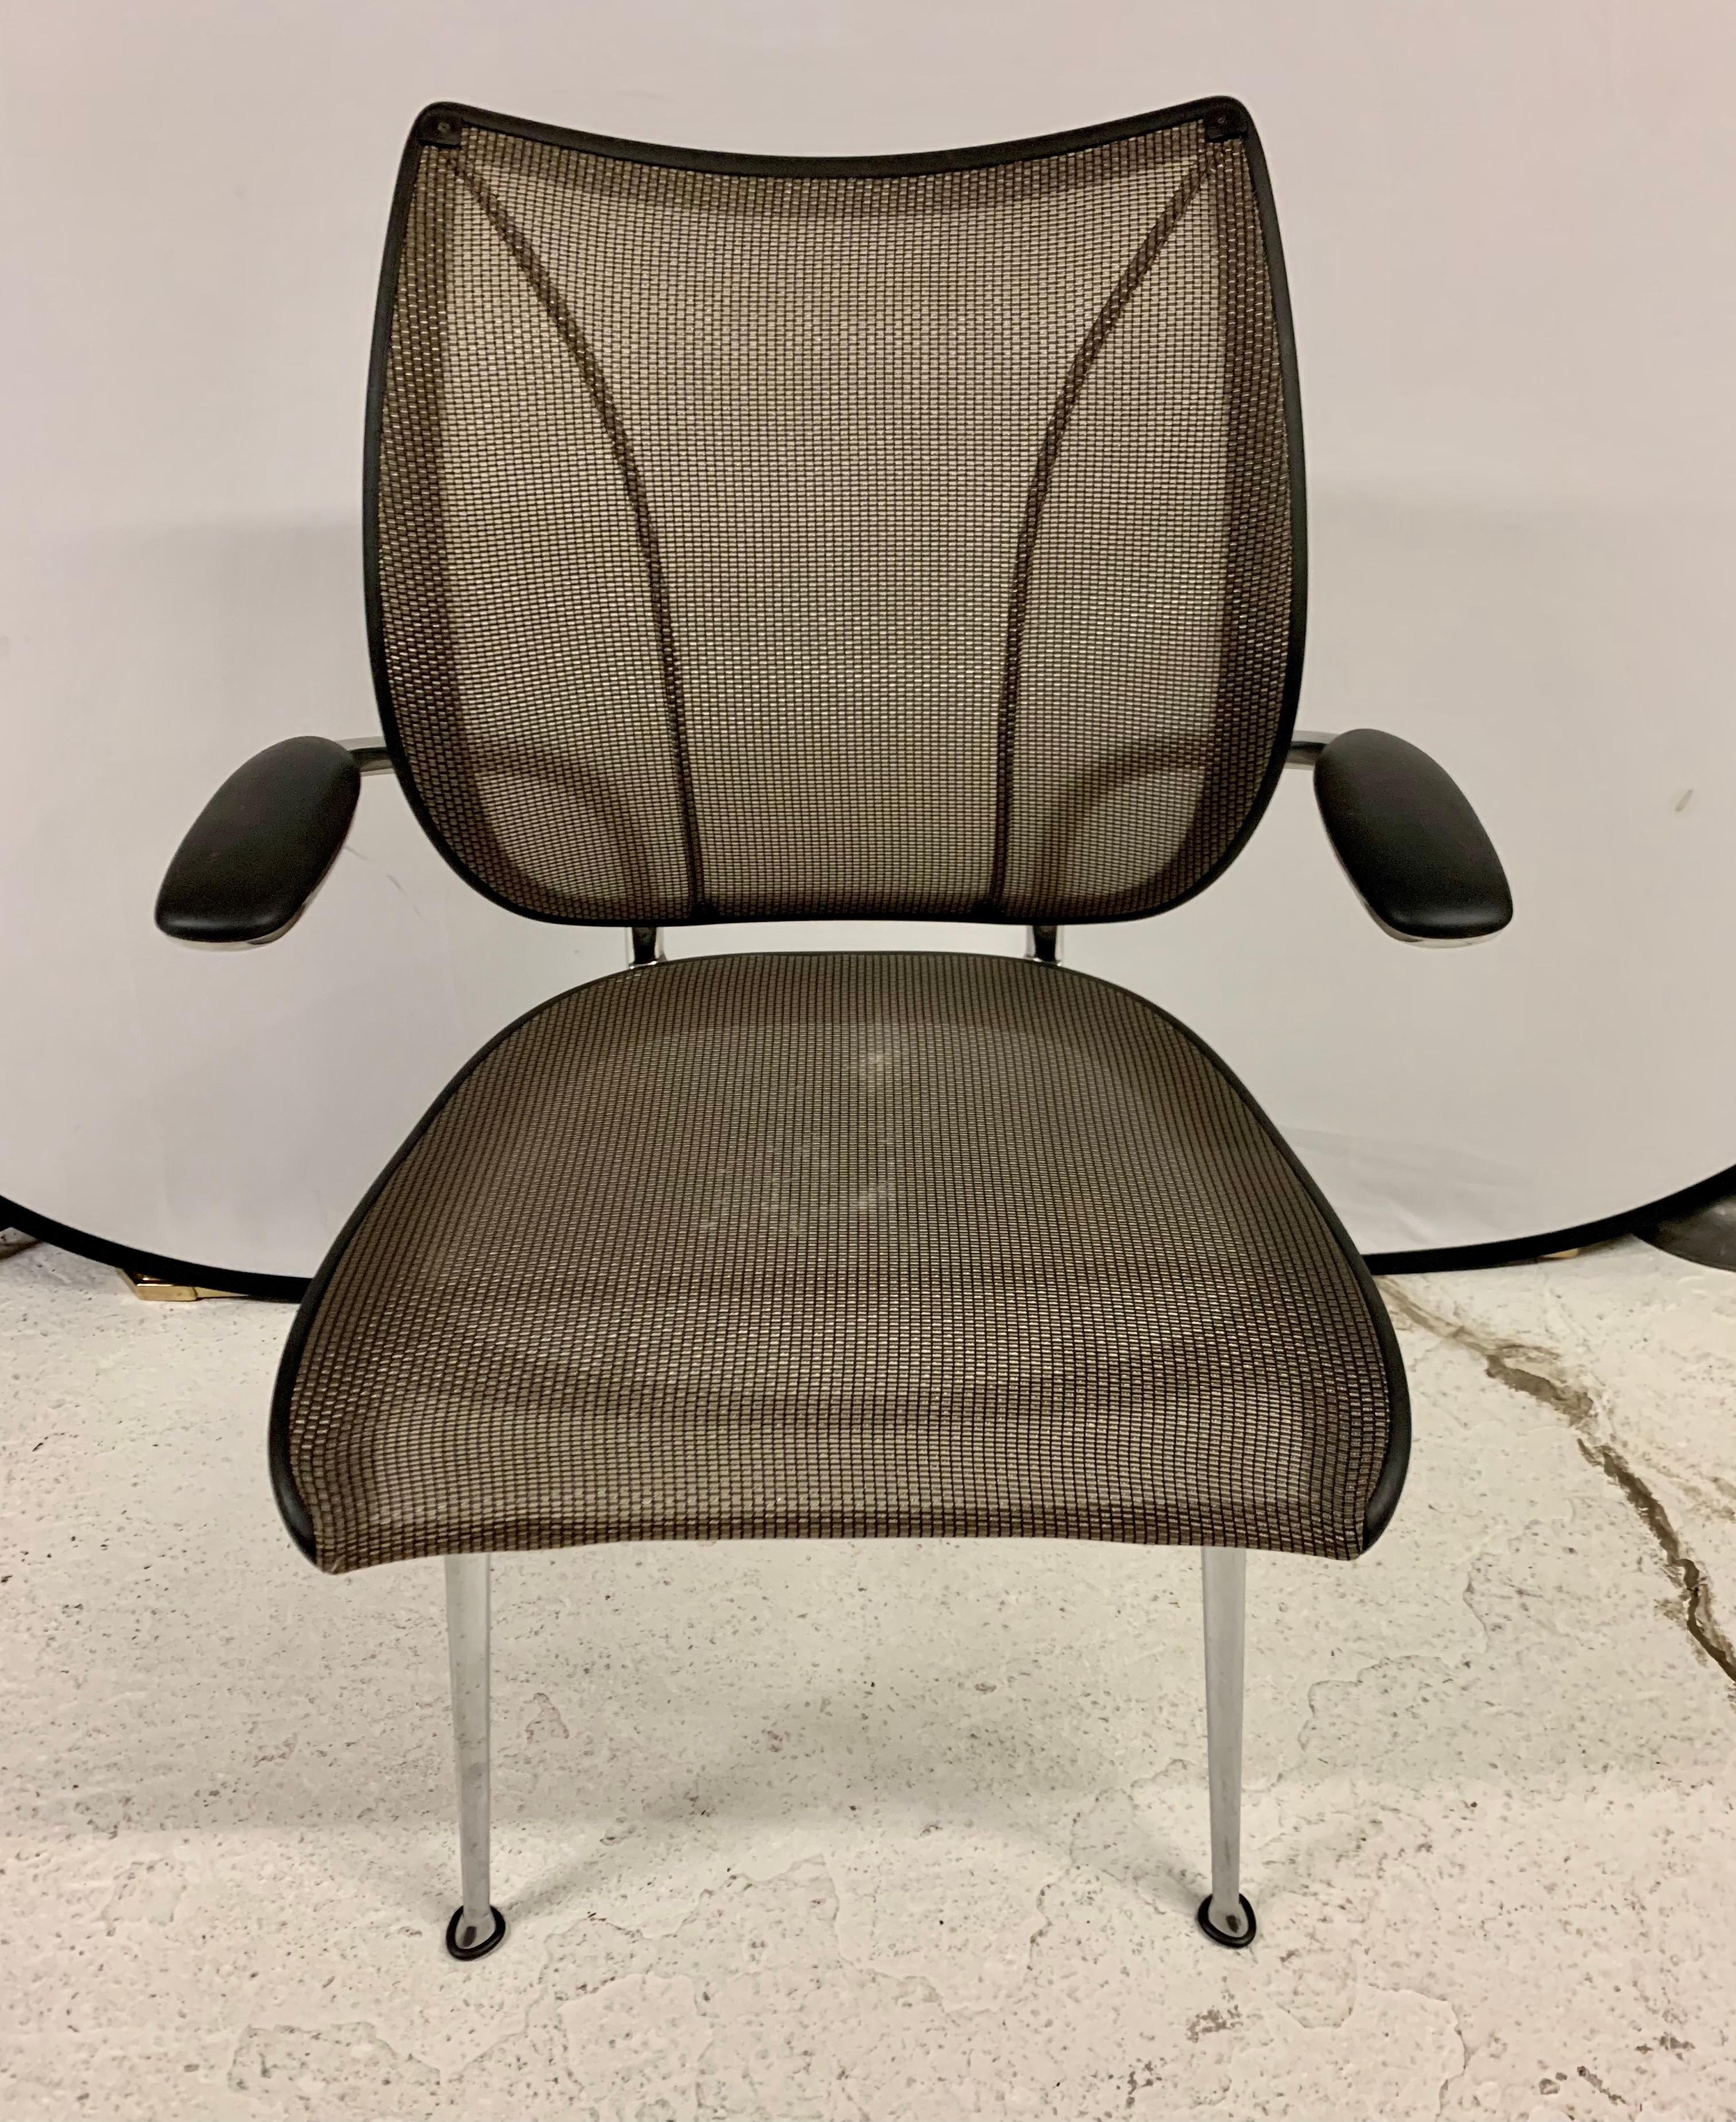 Iconic, Humanscale liberty side chairs a best of NeoCon Gold Award winner offers beauty, performance and unprecedented. Designed to complement the styling and features of the Liberty task and conference chair the pair of Humanscale liberty side